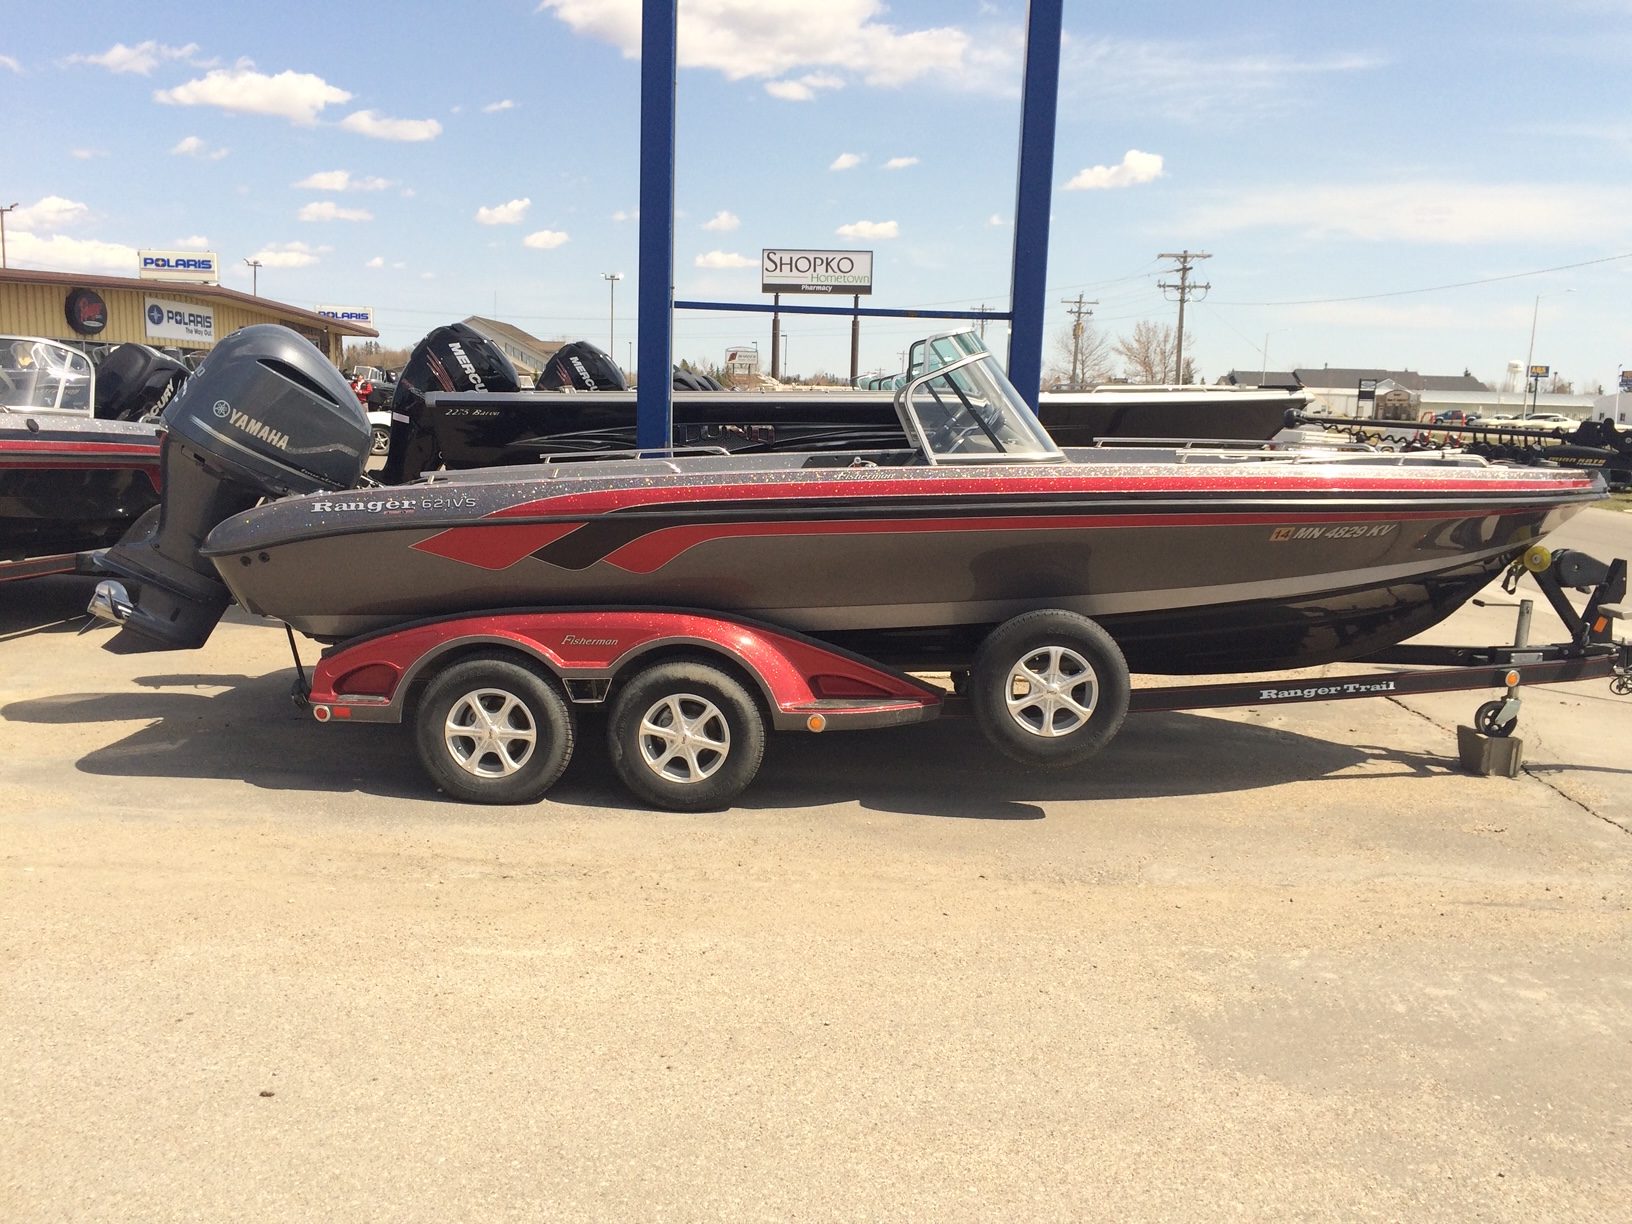 Walleye boat - General Discussion Forum - General Discussion Forum - Page 2